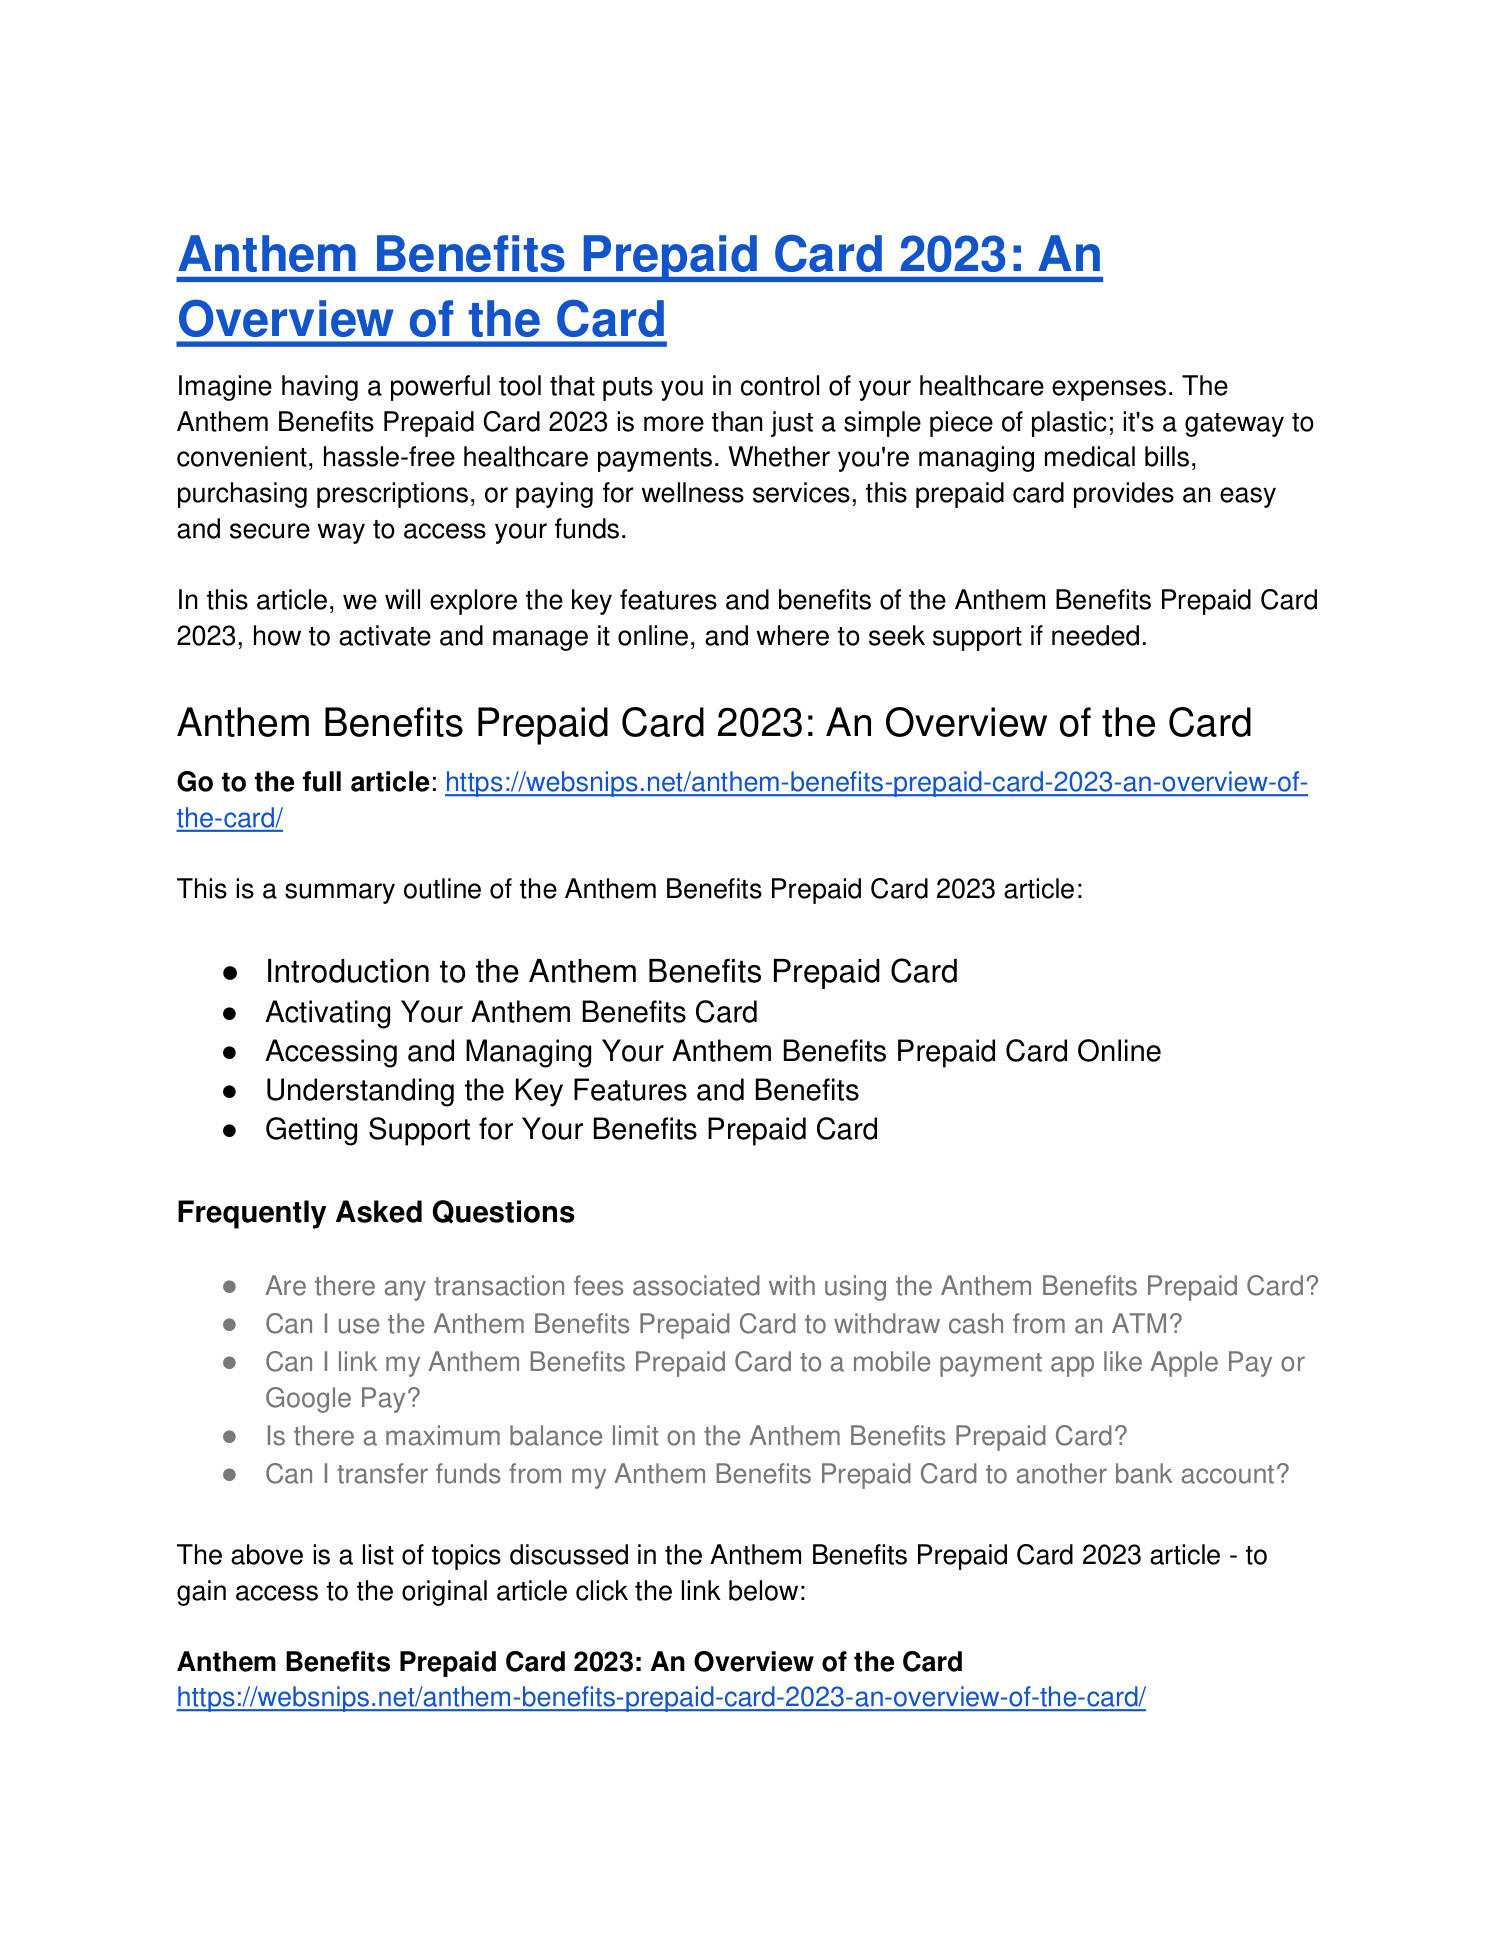 Anthem Benefits Prepaid Card 2023_ An Overview of the Card.docx DocDroid